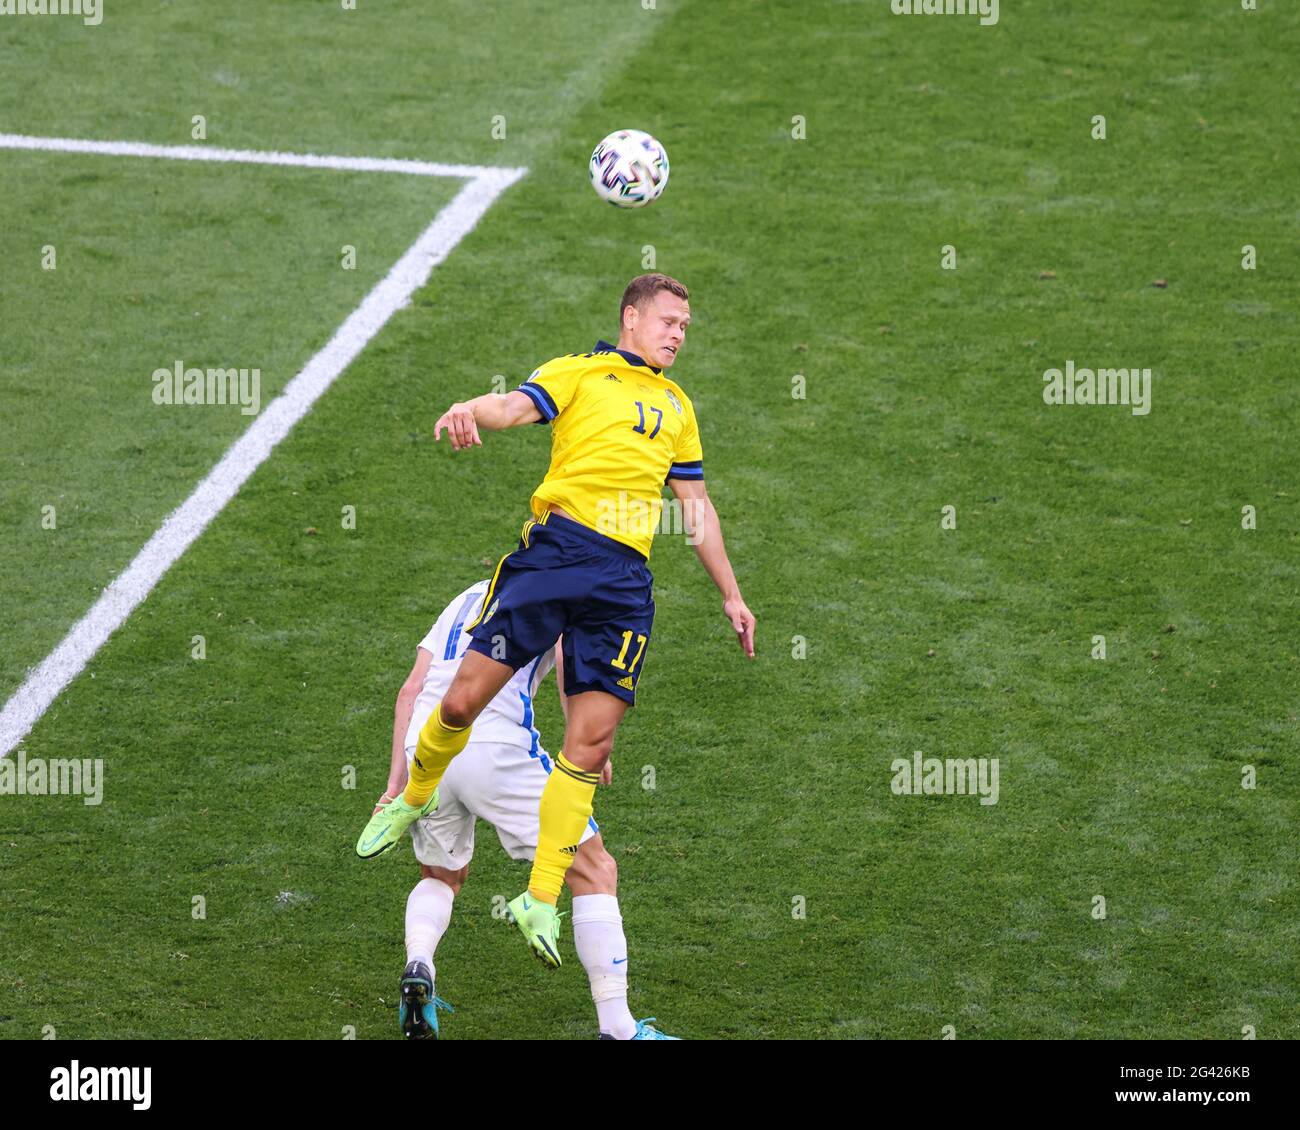 Saint Petersburg, Russia. 18th June, 2021. Viktor Claesson (17) of Sweden in action during the European championship EURO 2020 between Sweden and Slovakia at Gazprom Arena. (Final Score; Sweden 1:0 Slovakia). Credit: SOPA Images Limited/Alamy Live News Stock Photo